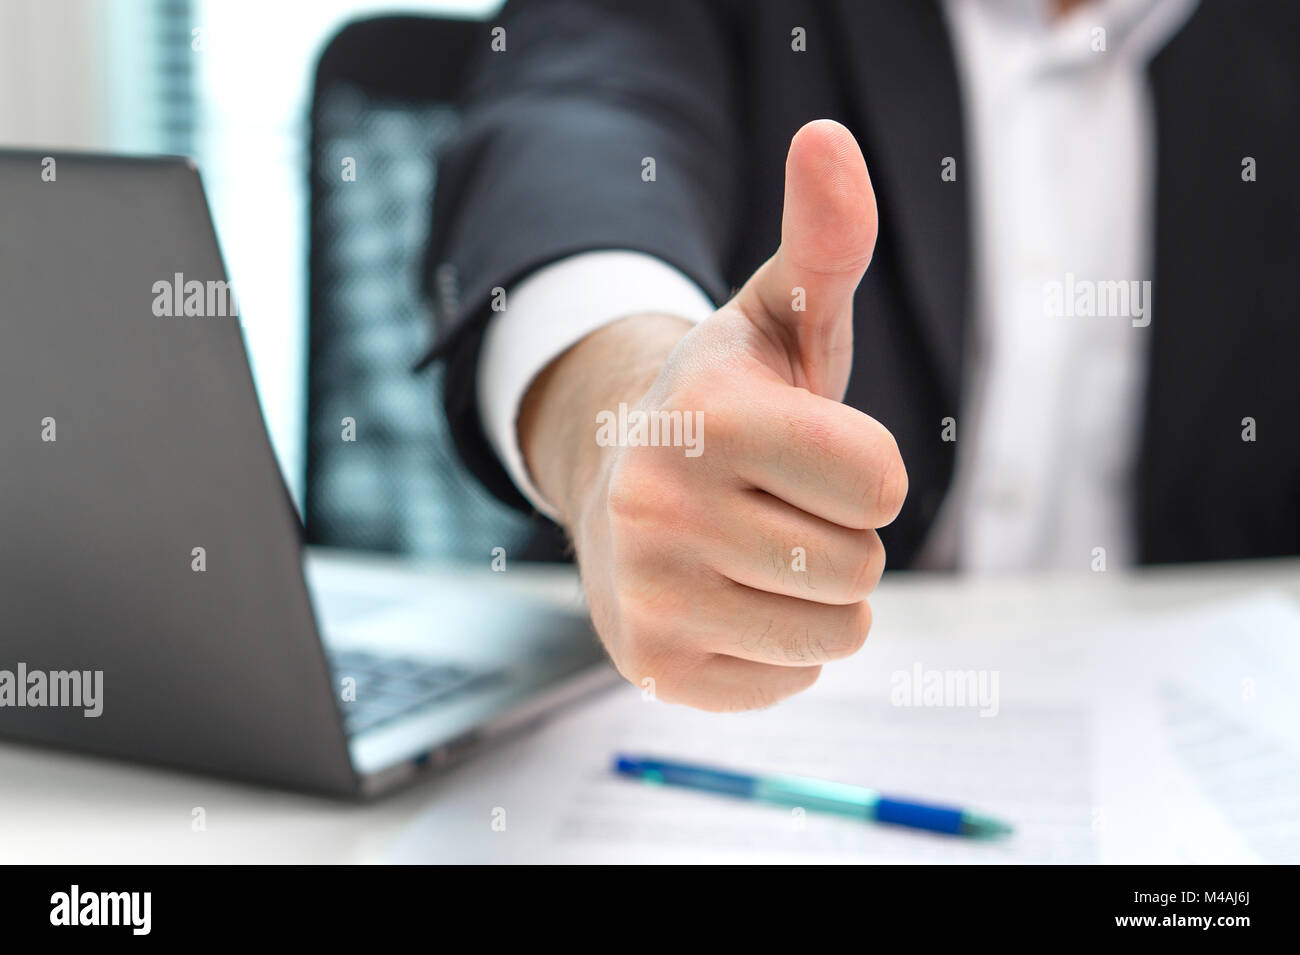 Business man showing thumbs up in office. Stock Photo